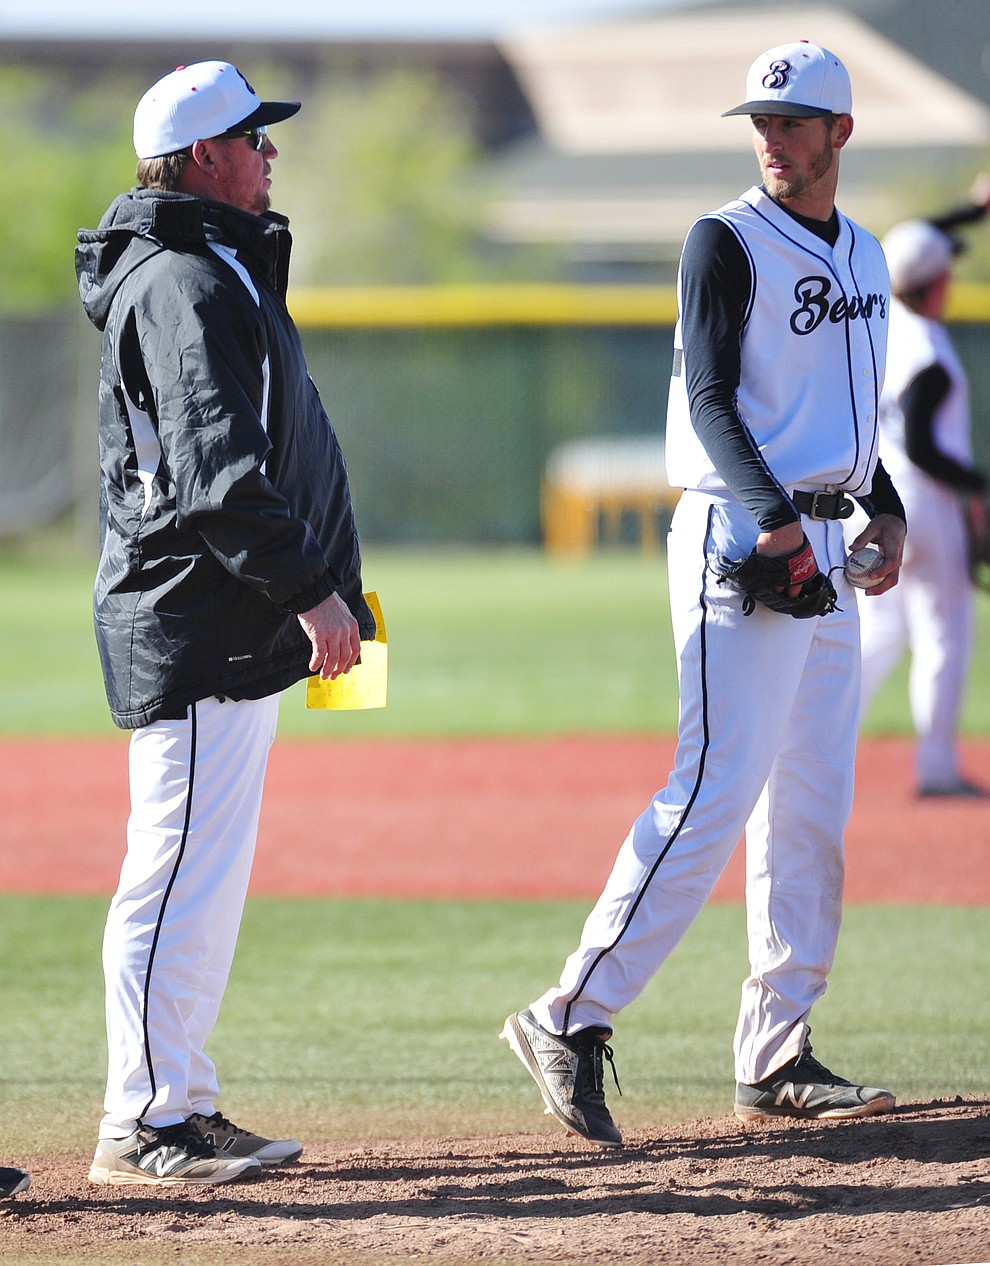 Bradshaw Mountain Head Coach Brian Bundrick talks to pitcher Paxton Prentice as the Bears hosted Shadow Mountain on a windy day in Prescott Valley Thursday, April 19, 2018. (Les Stukenberg/Courier)